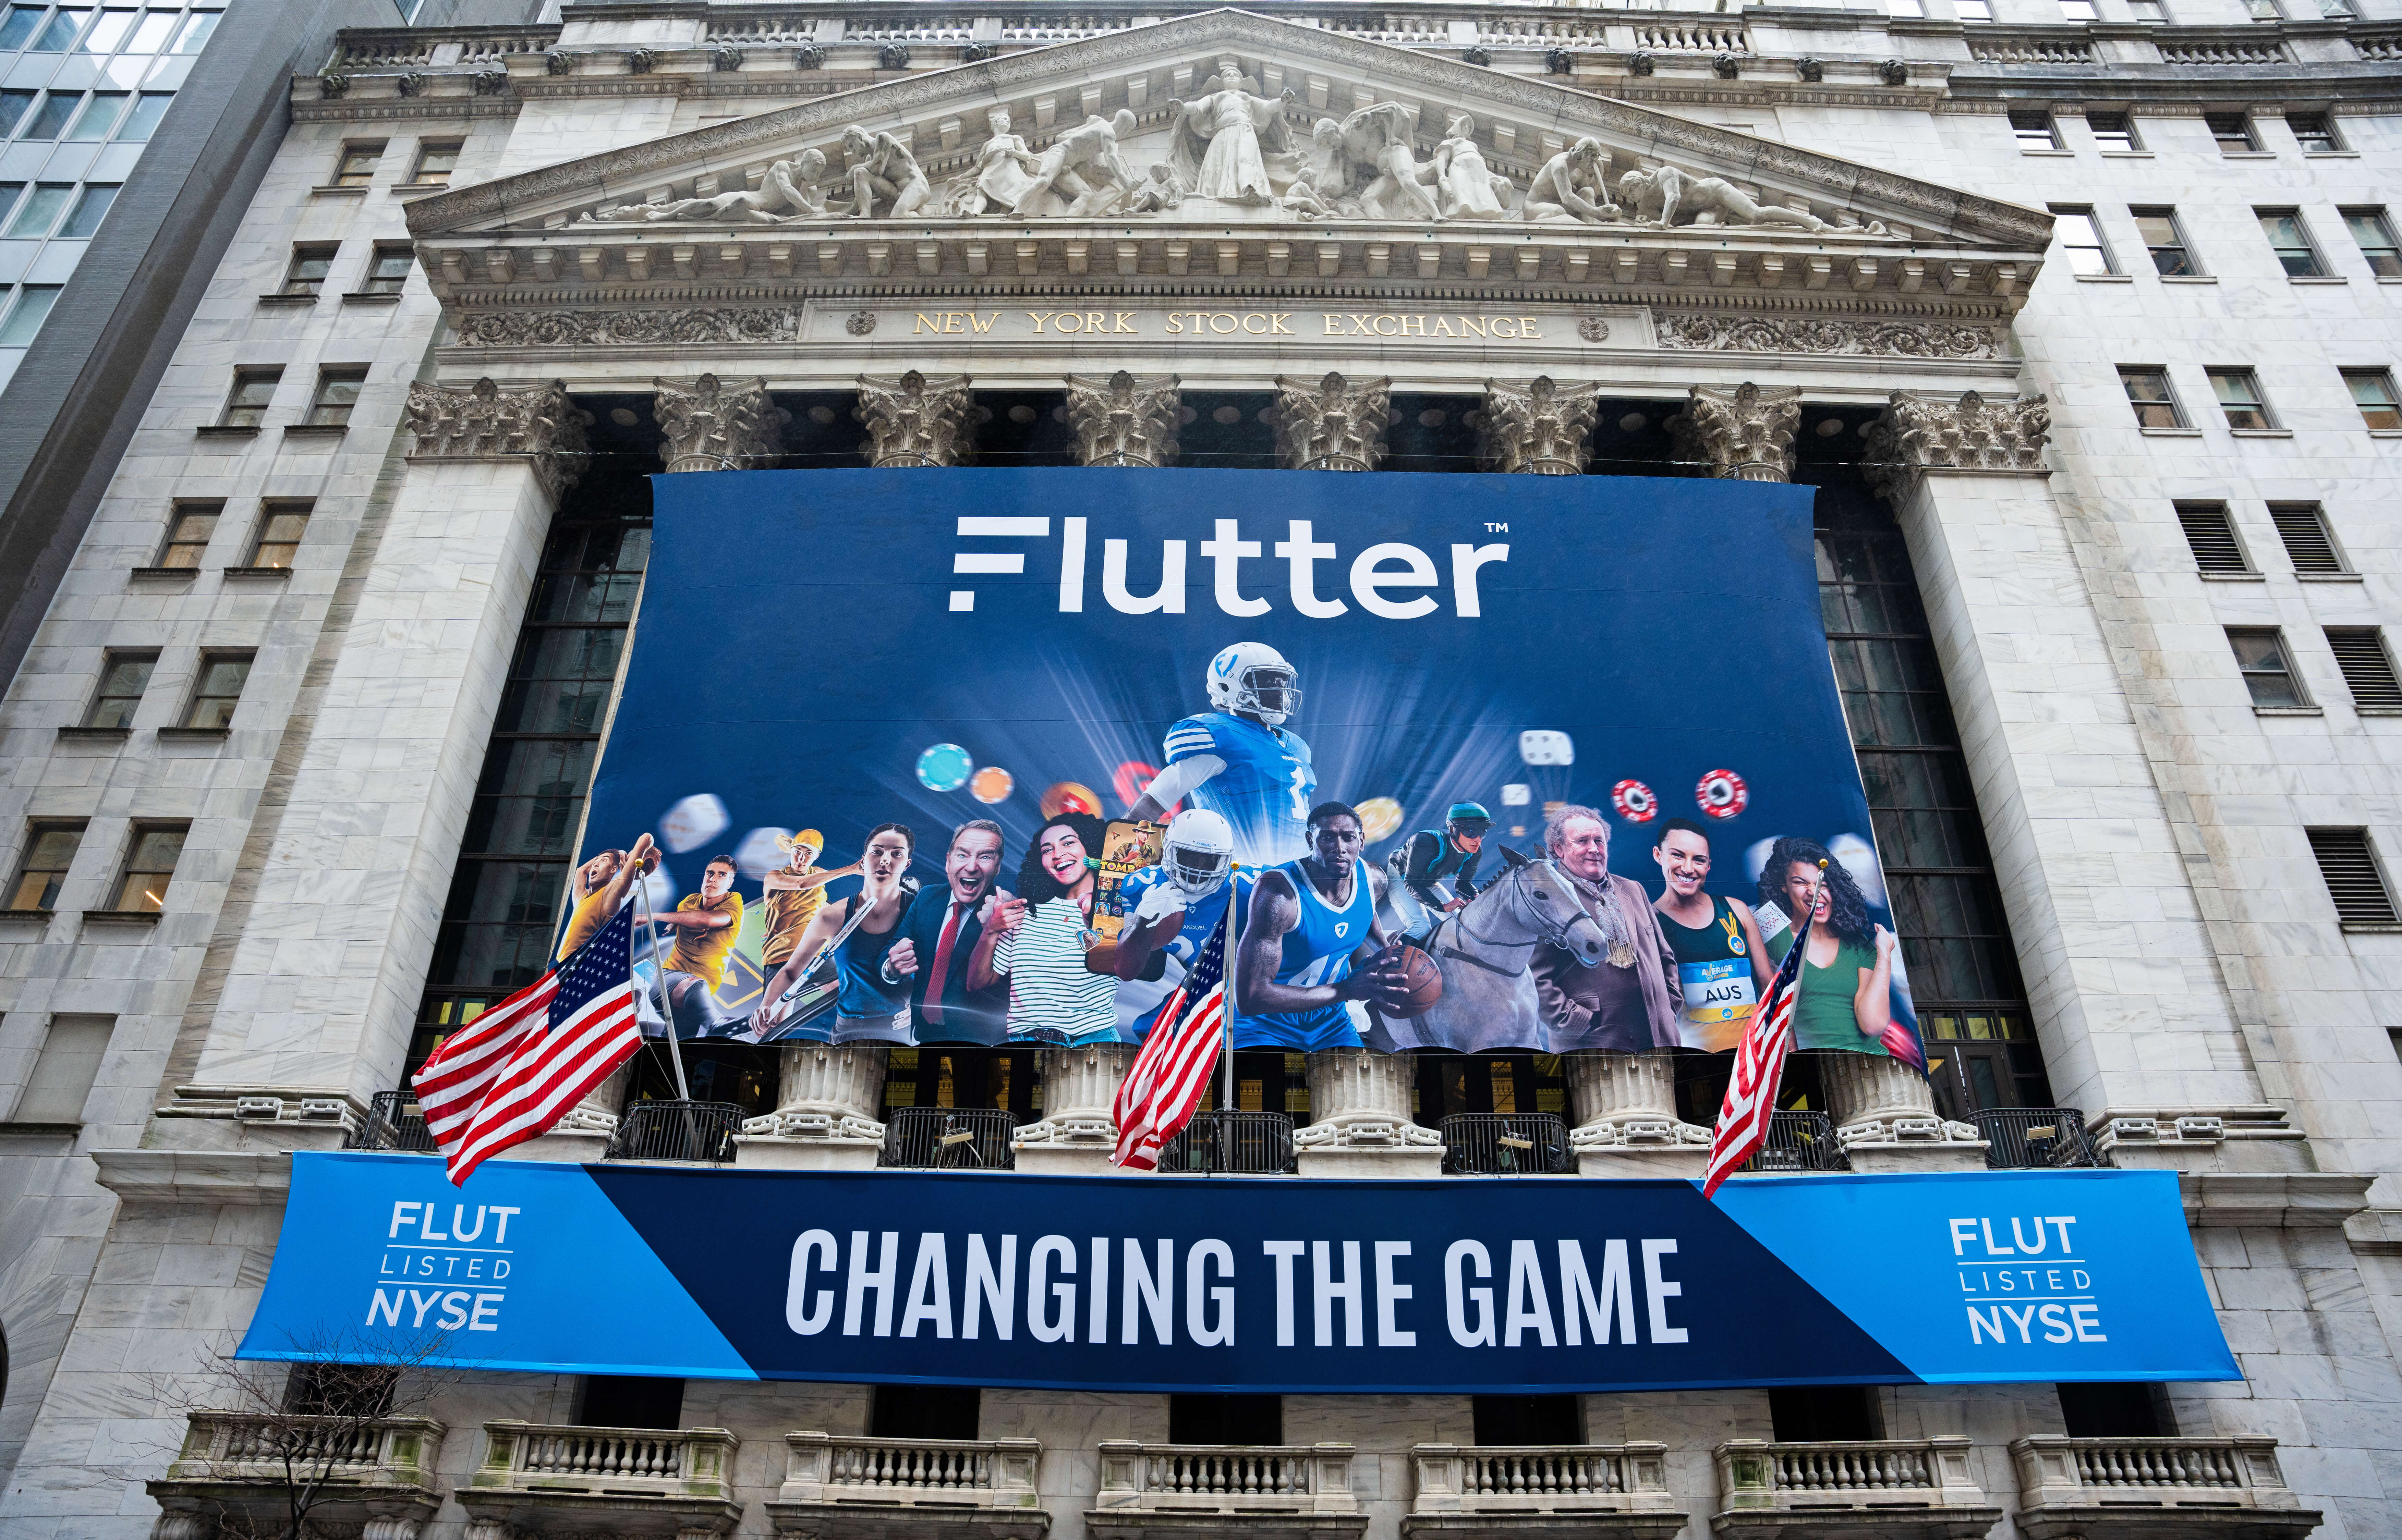 How To Bet - Flutter Moves Primary Listing to NYSE, CFO Steps Down